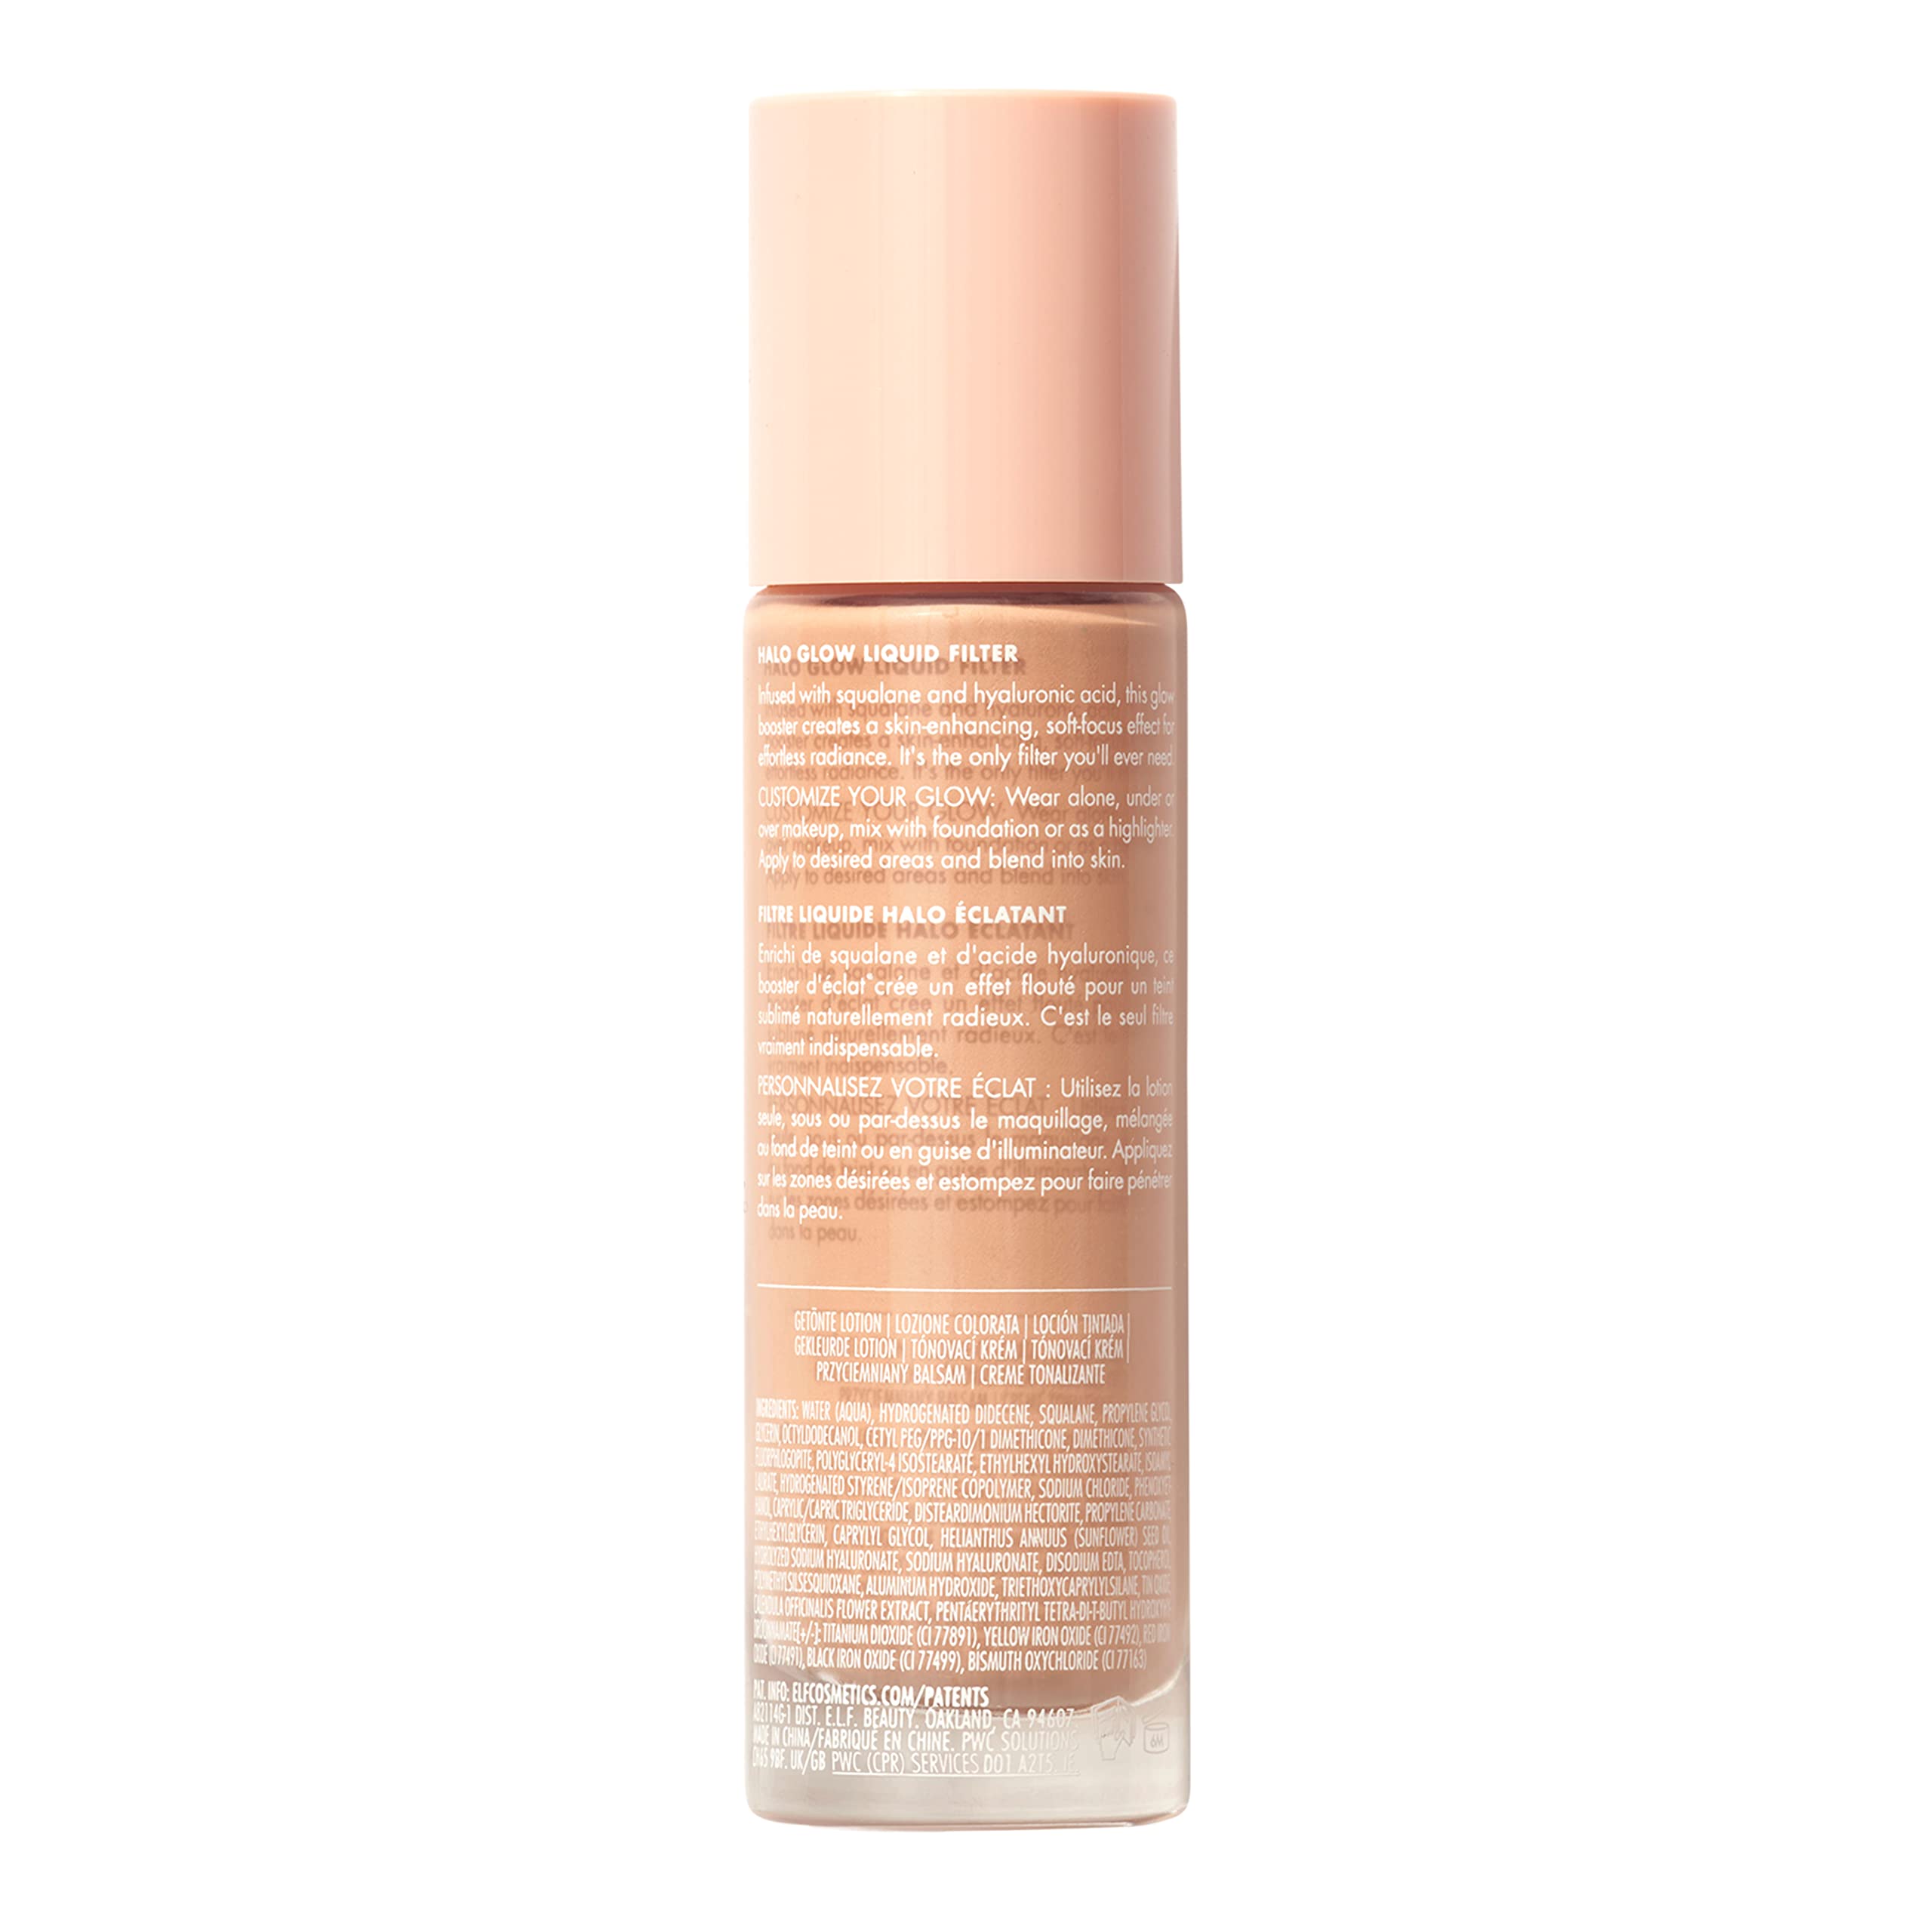 e.l.f. Halo Glow Liquid Filter, Complexion Booster For A Glowing, Soft-Focus Look, Infused With Hyaluronic Acid, Vegan & Cruelty-Free, 3 Light/Medium